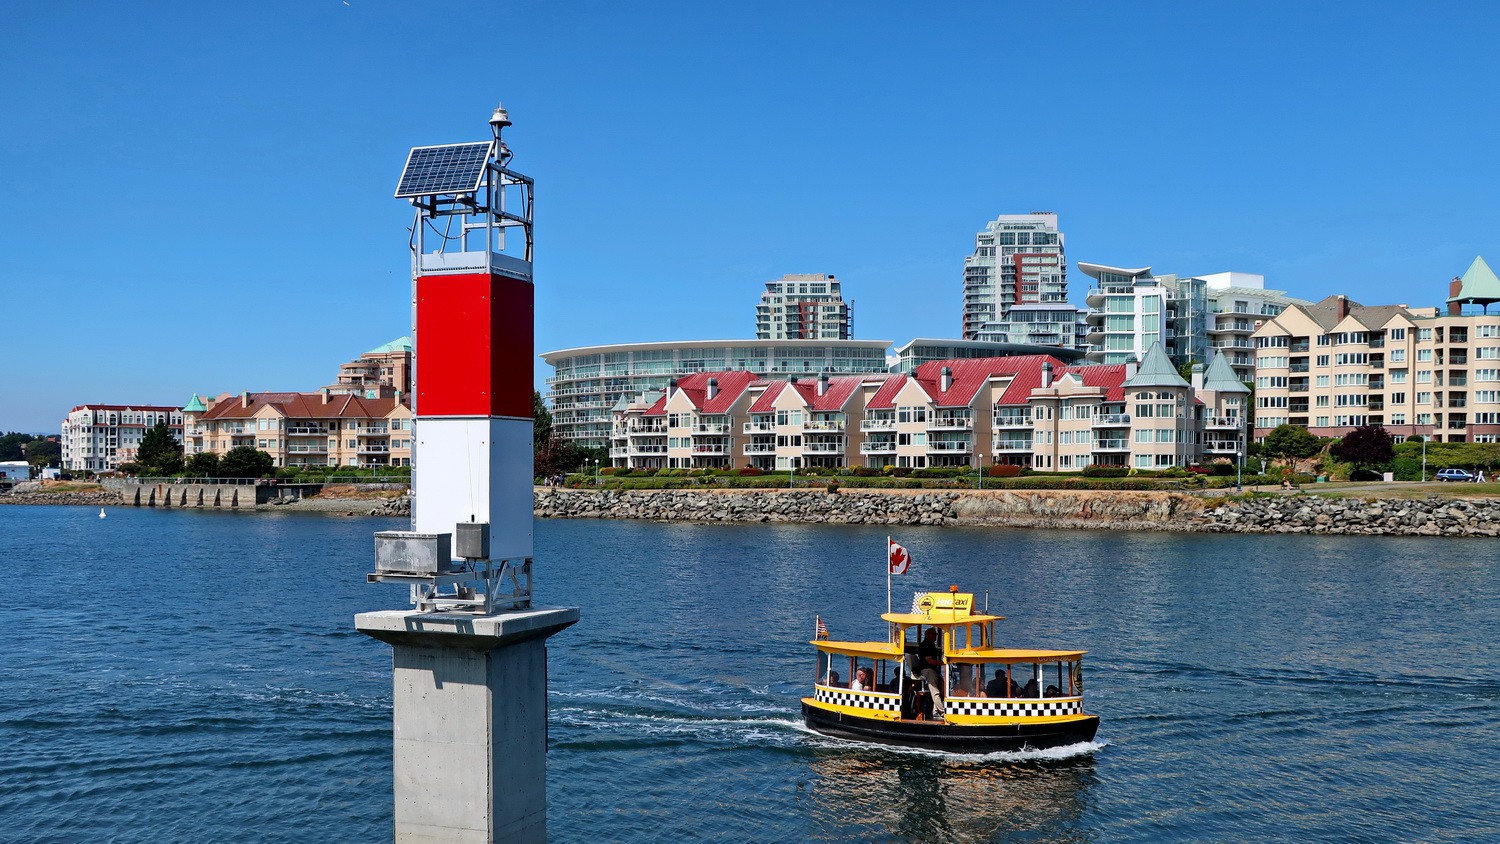 Watertaxi of Victoria